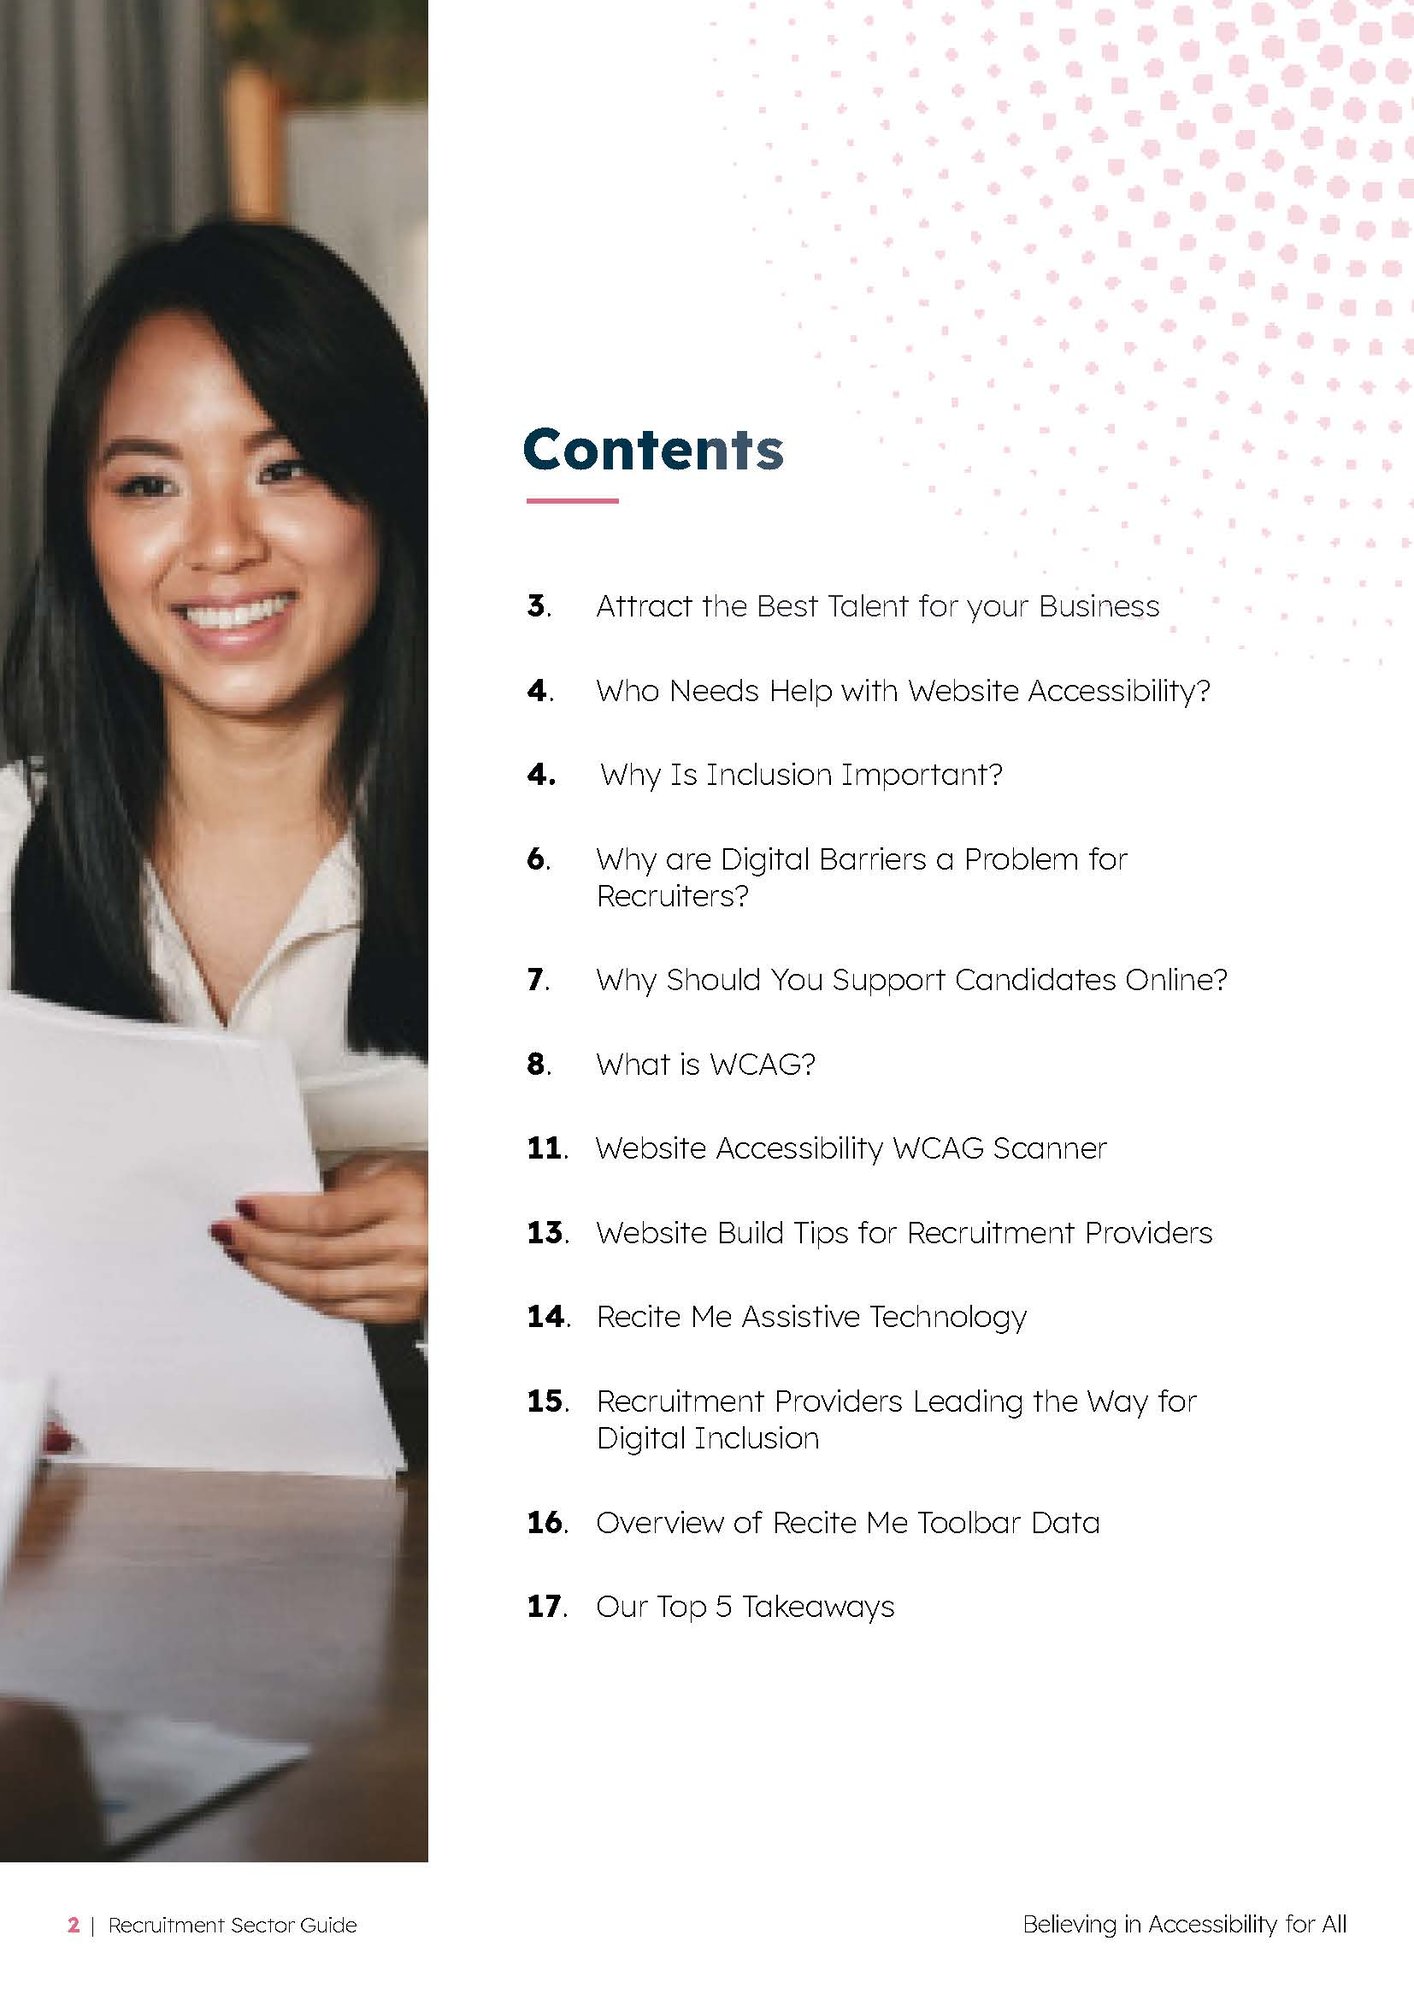 Contents page from the Recruitment Sector Guide 